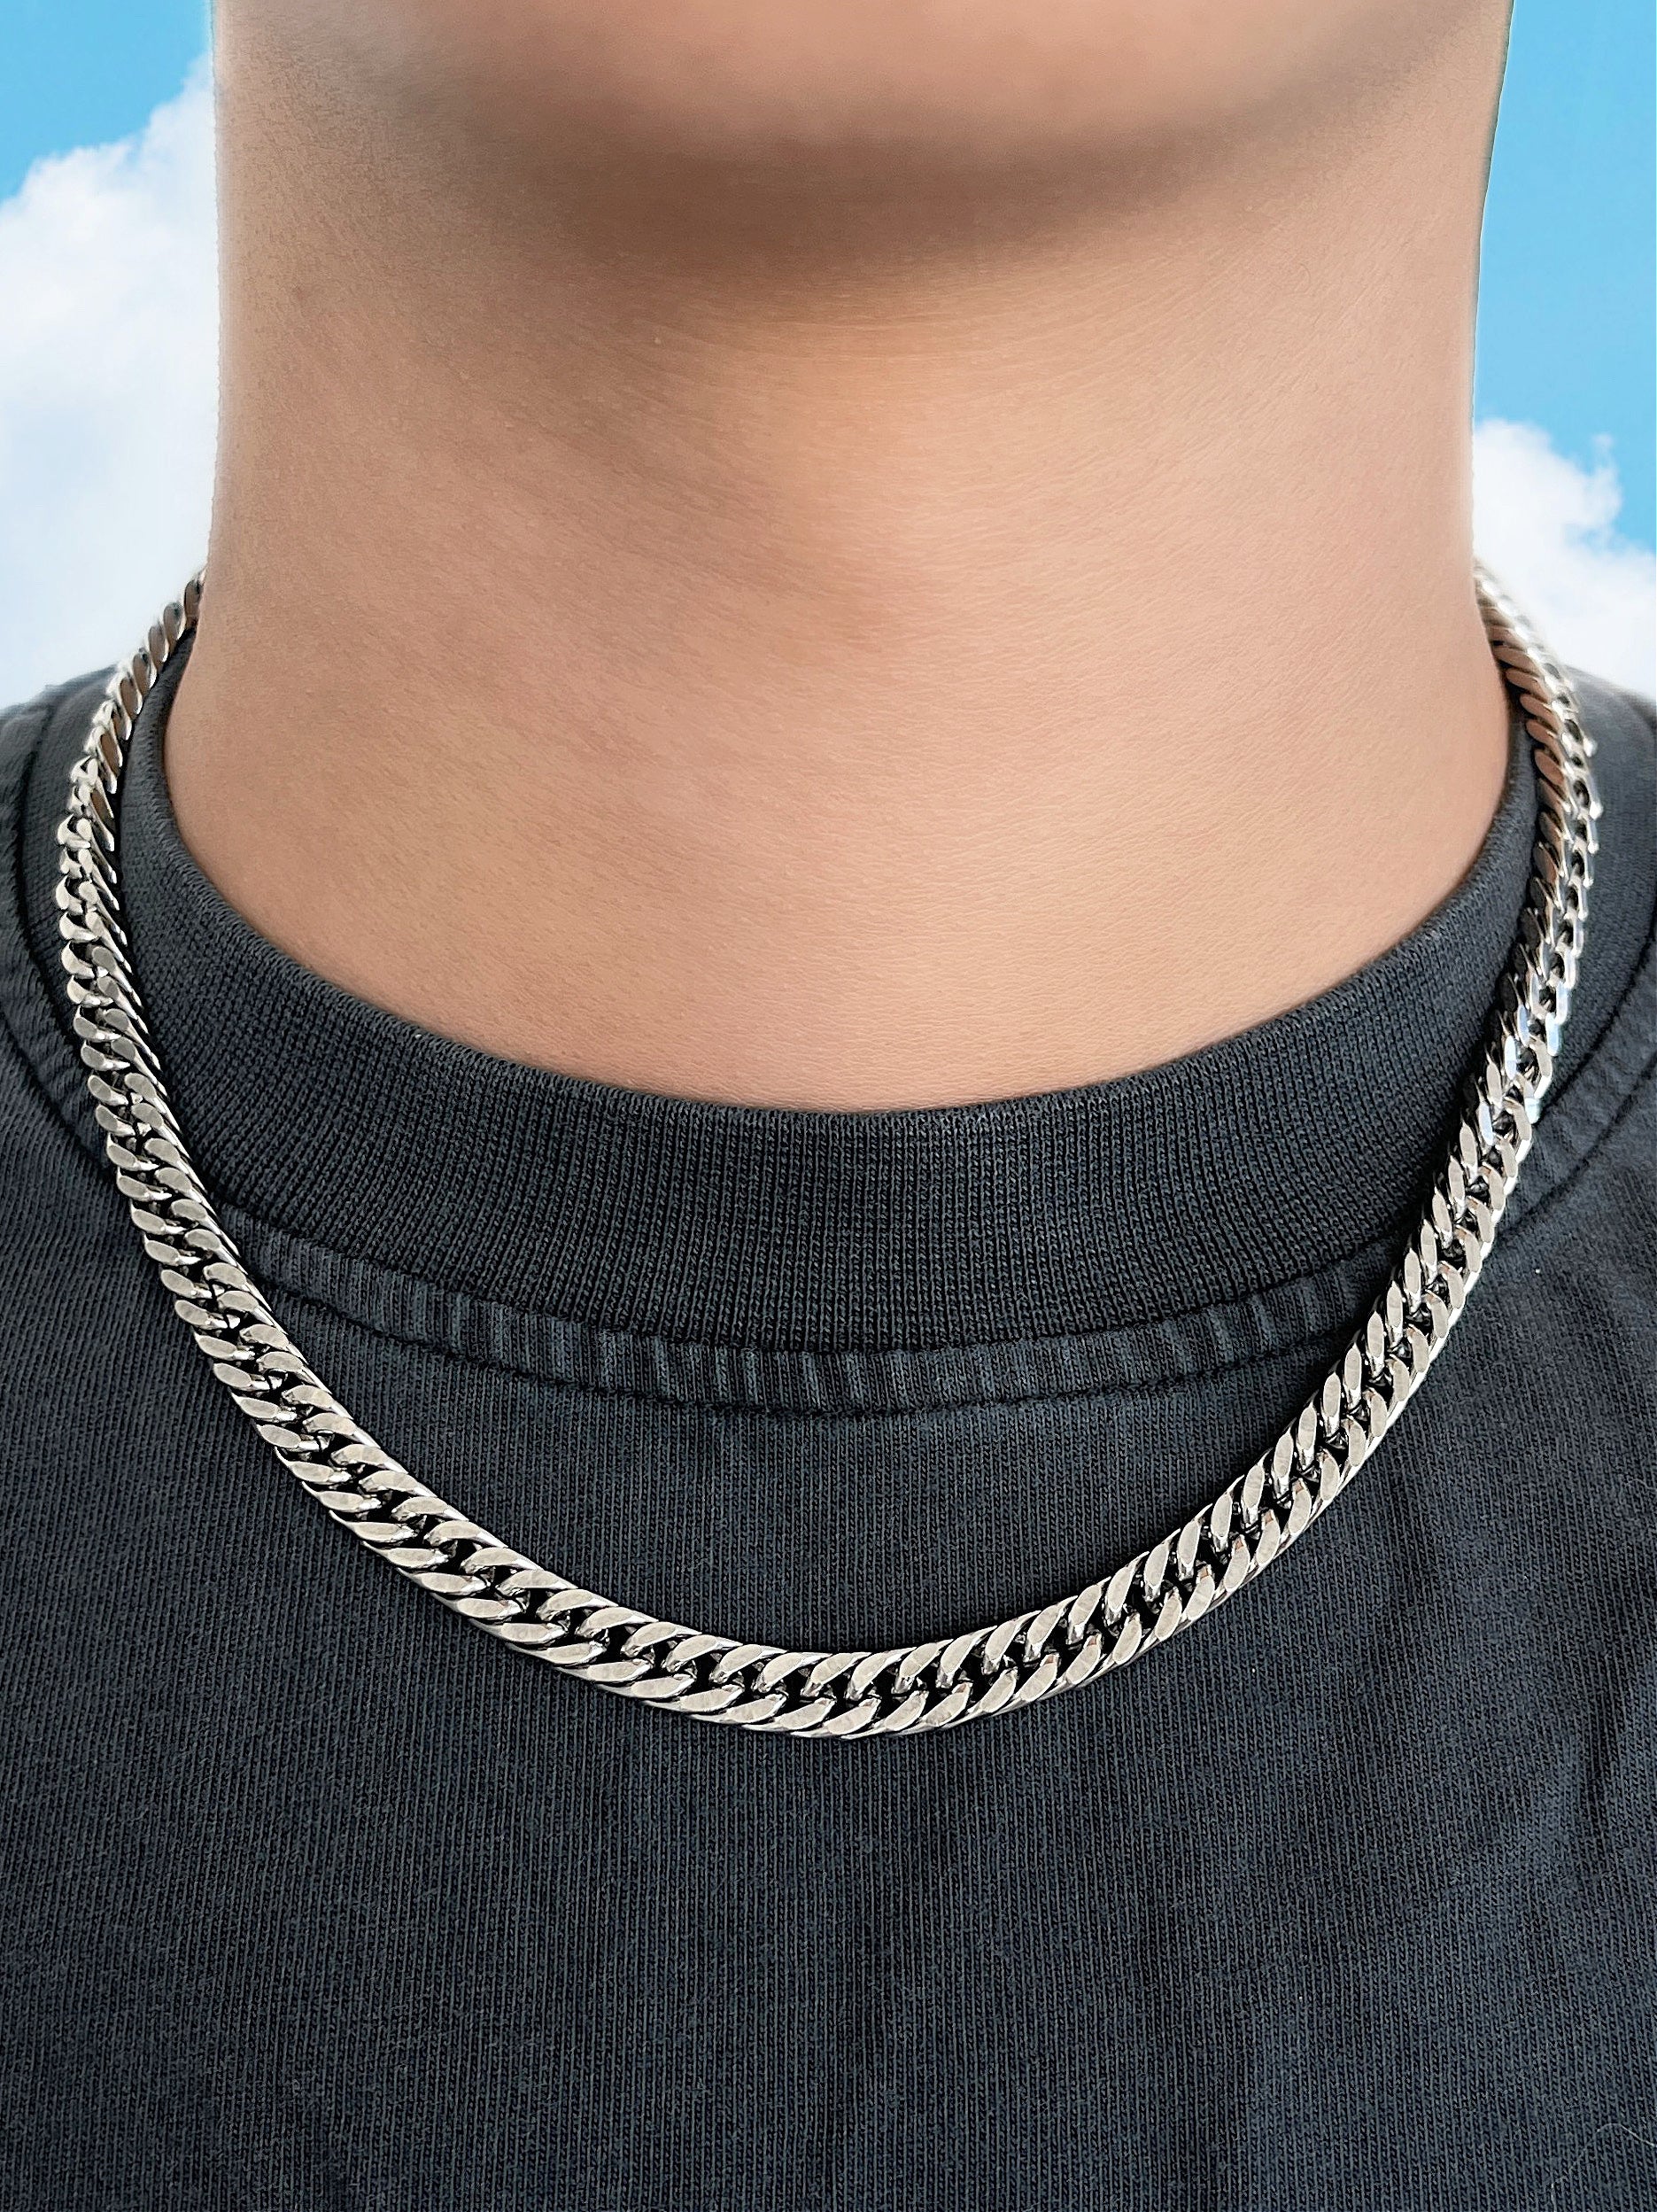 EVERYDAY CHAIN NECKLACE